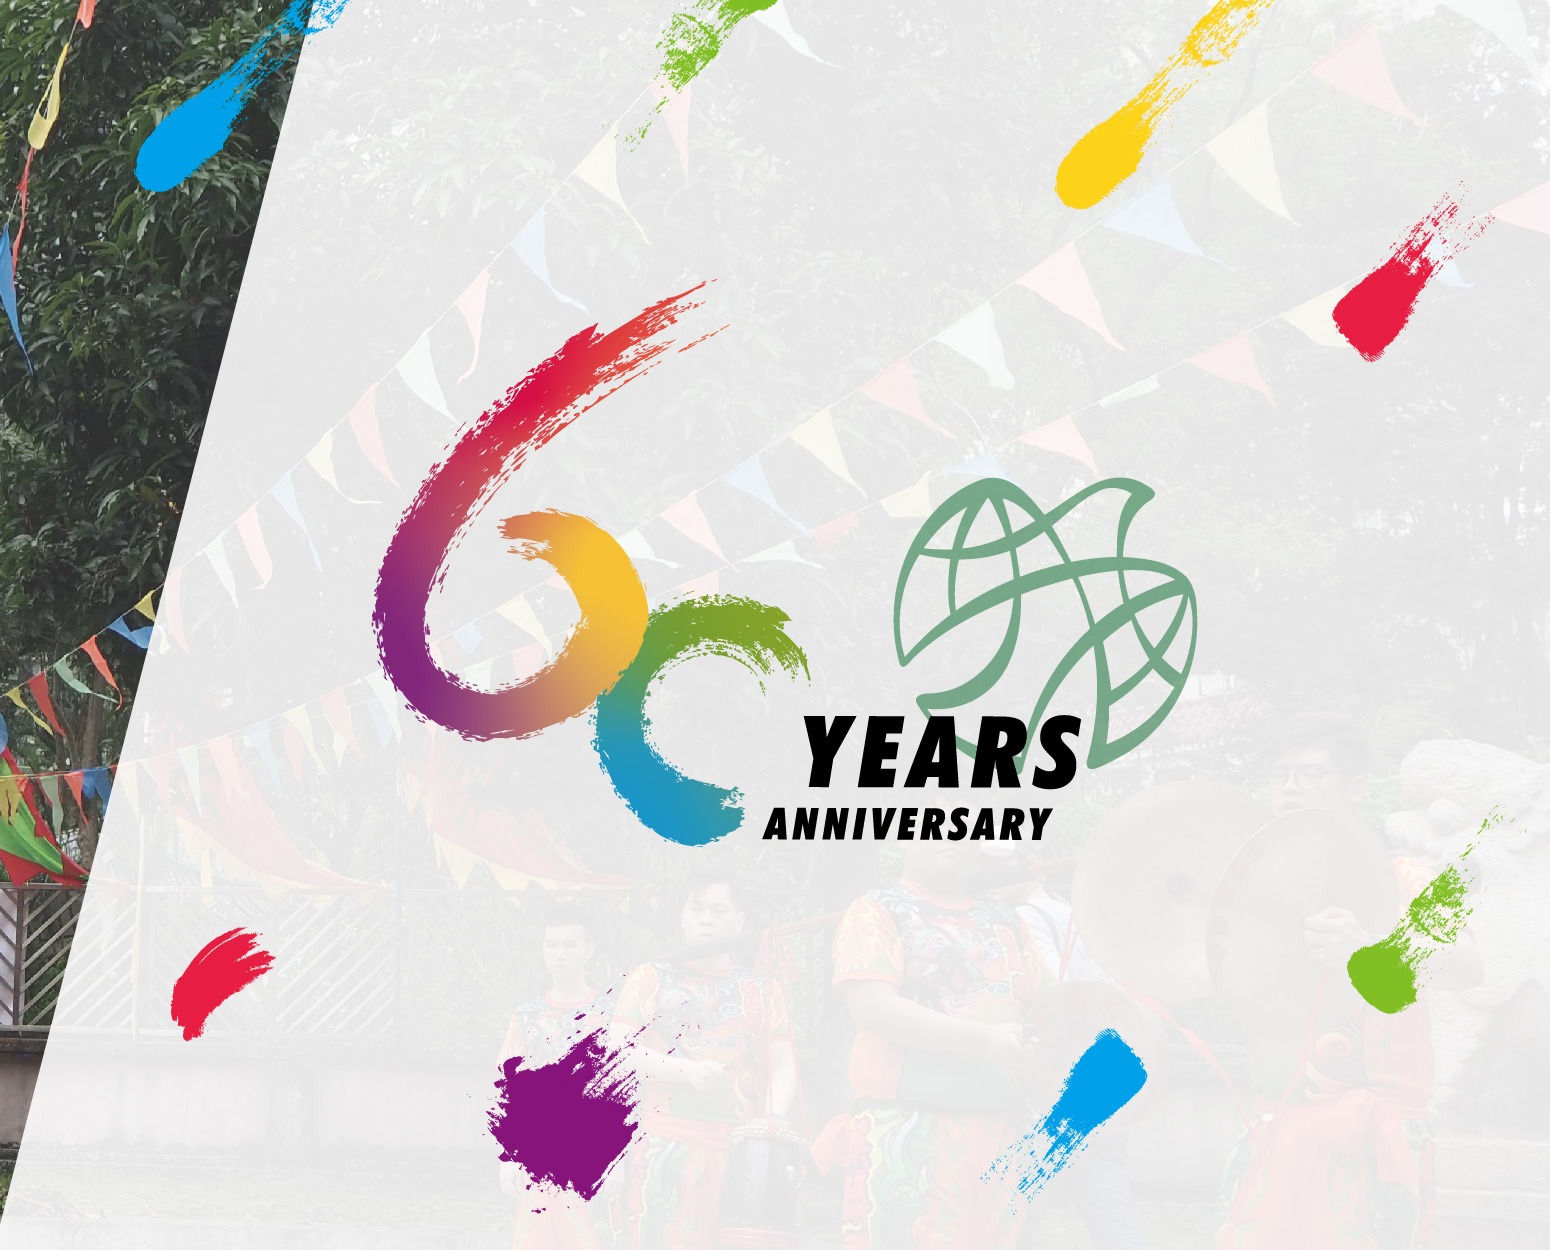 January 2021: AYP Happy 60th Anniversary Stand by our Young People